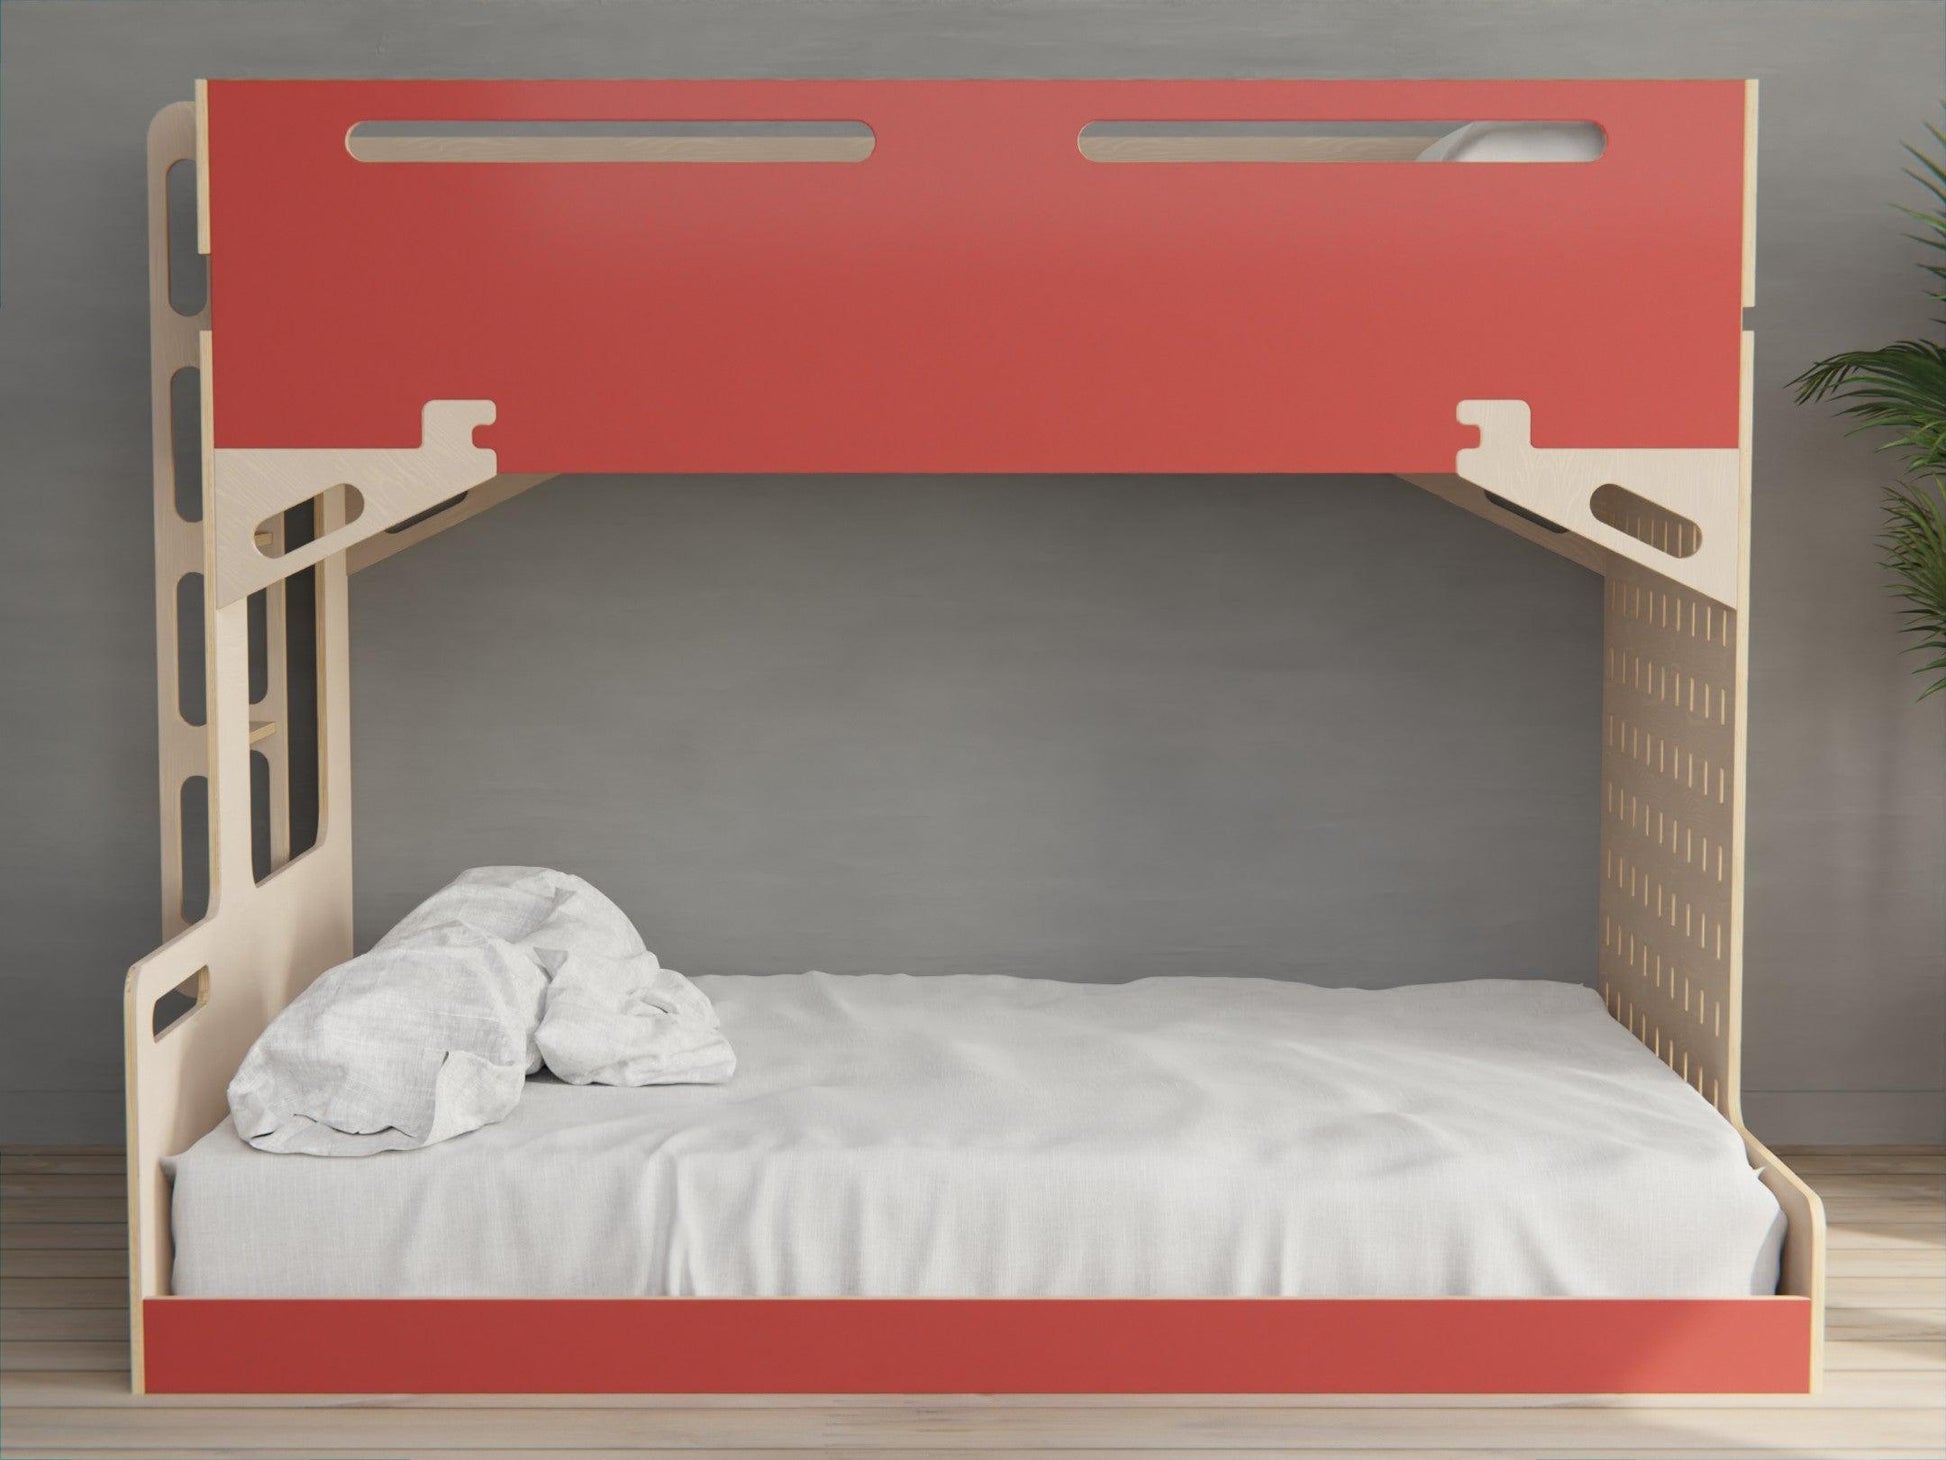 Embrace practicality and style with our plywood triple bunk bed in red. Designed to maximise space and comfort.